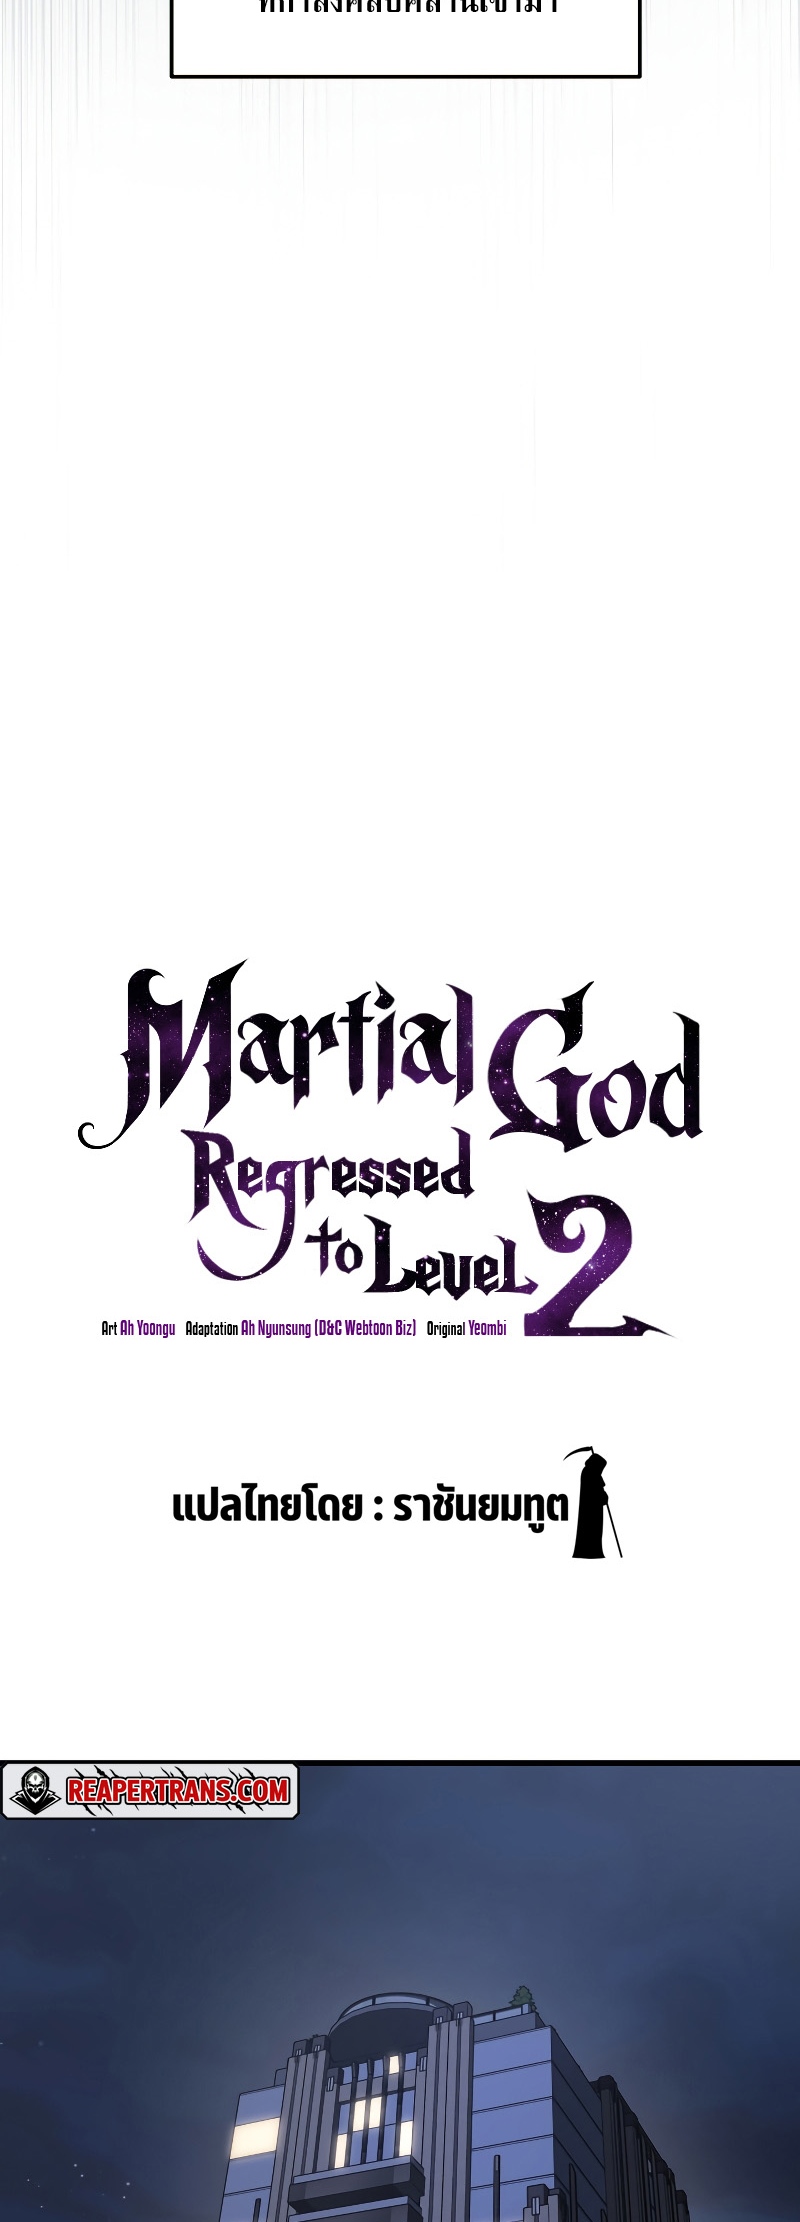 Martial God Regressed to Level 2 13 09